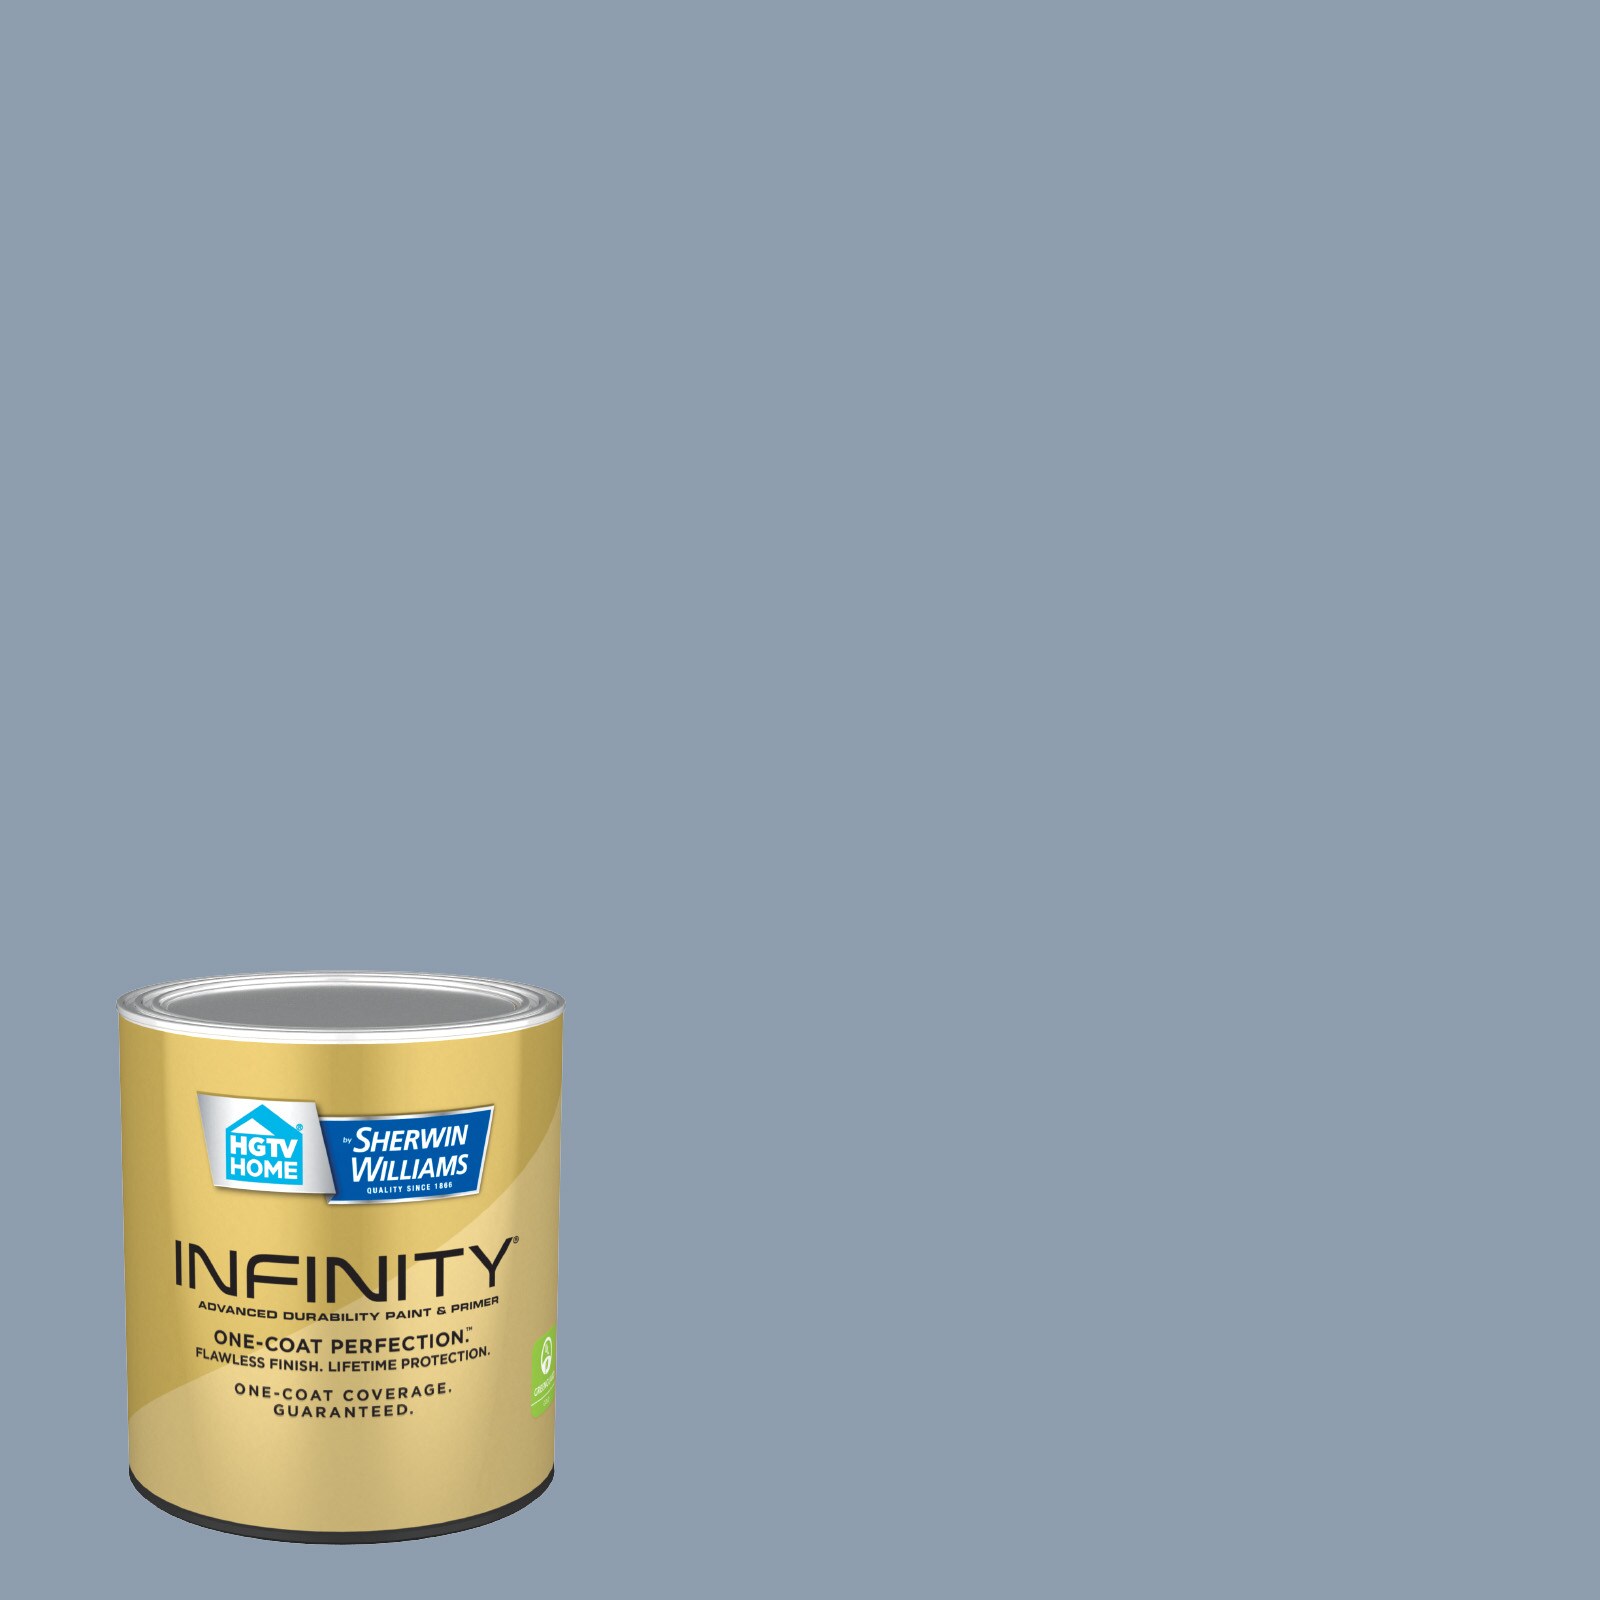 Behr N520-6 Asphalt Gray Precisely Matched For Paint and Spray Paint